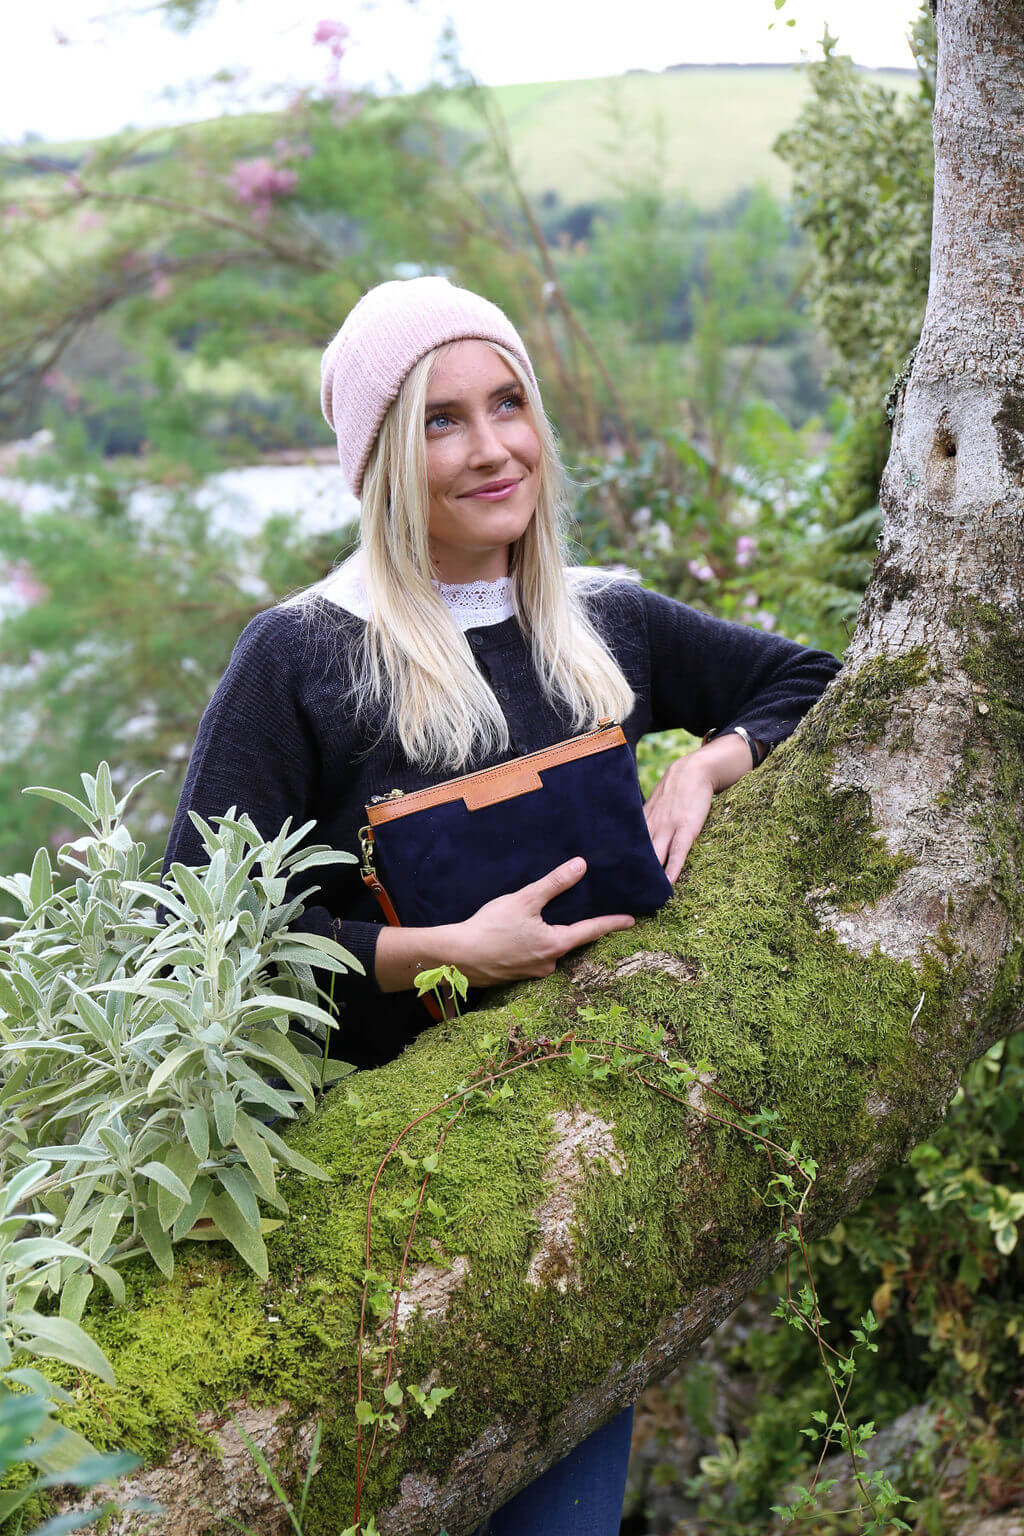 Diana 2 in 1 Clutch - Navy Suede - Will Bees Bespoke